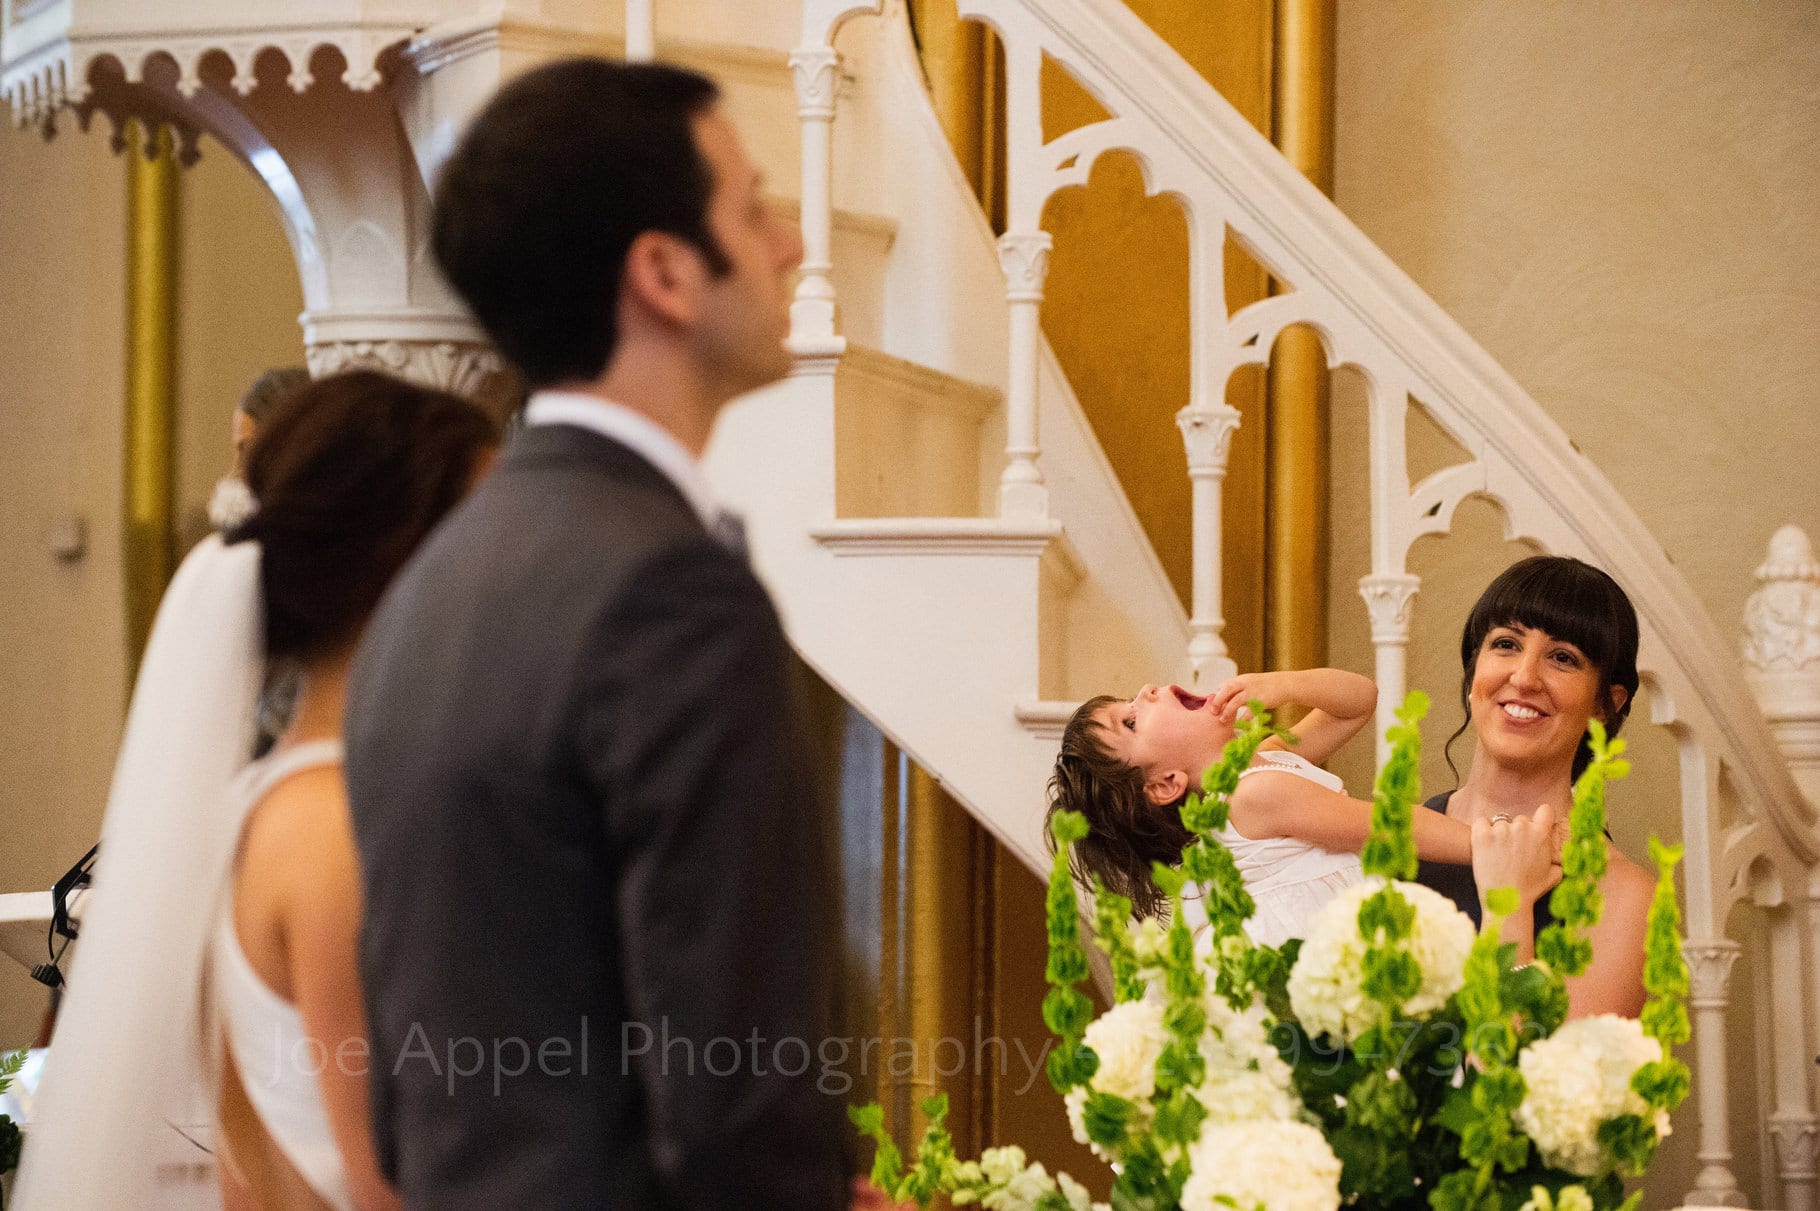 A bride and groom stand in the foreground while a bridesmaid holds her daughter in the background. The daughter lays back and looks at the ceiling with her mouth open.